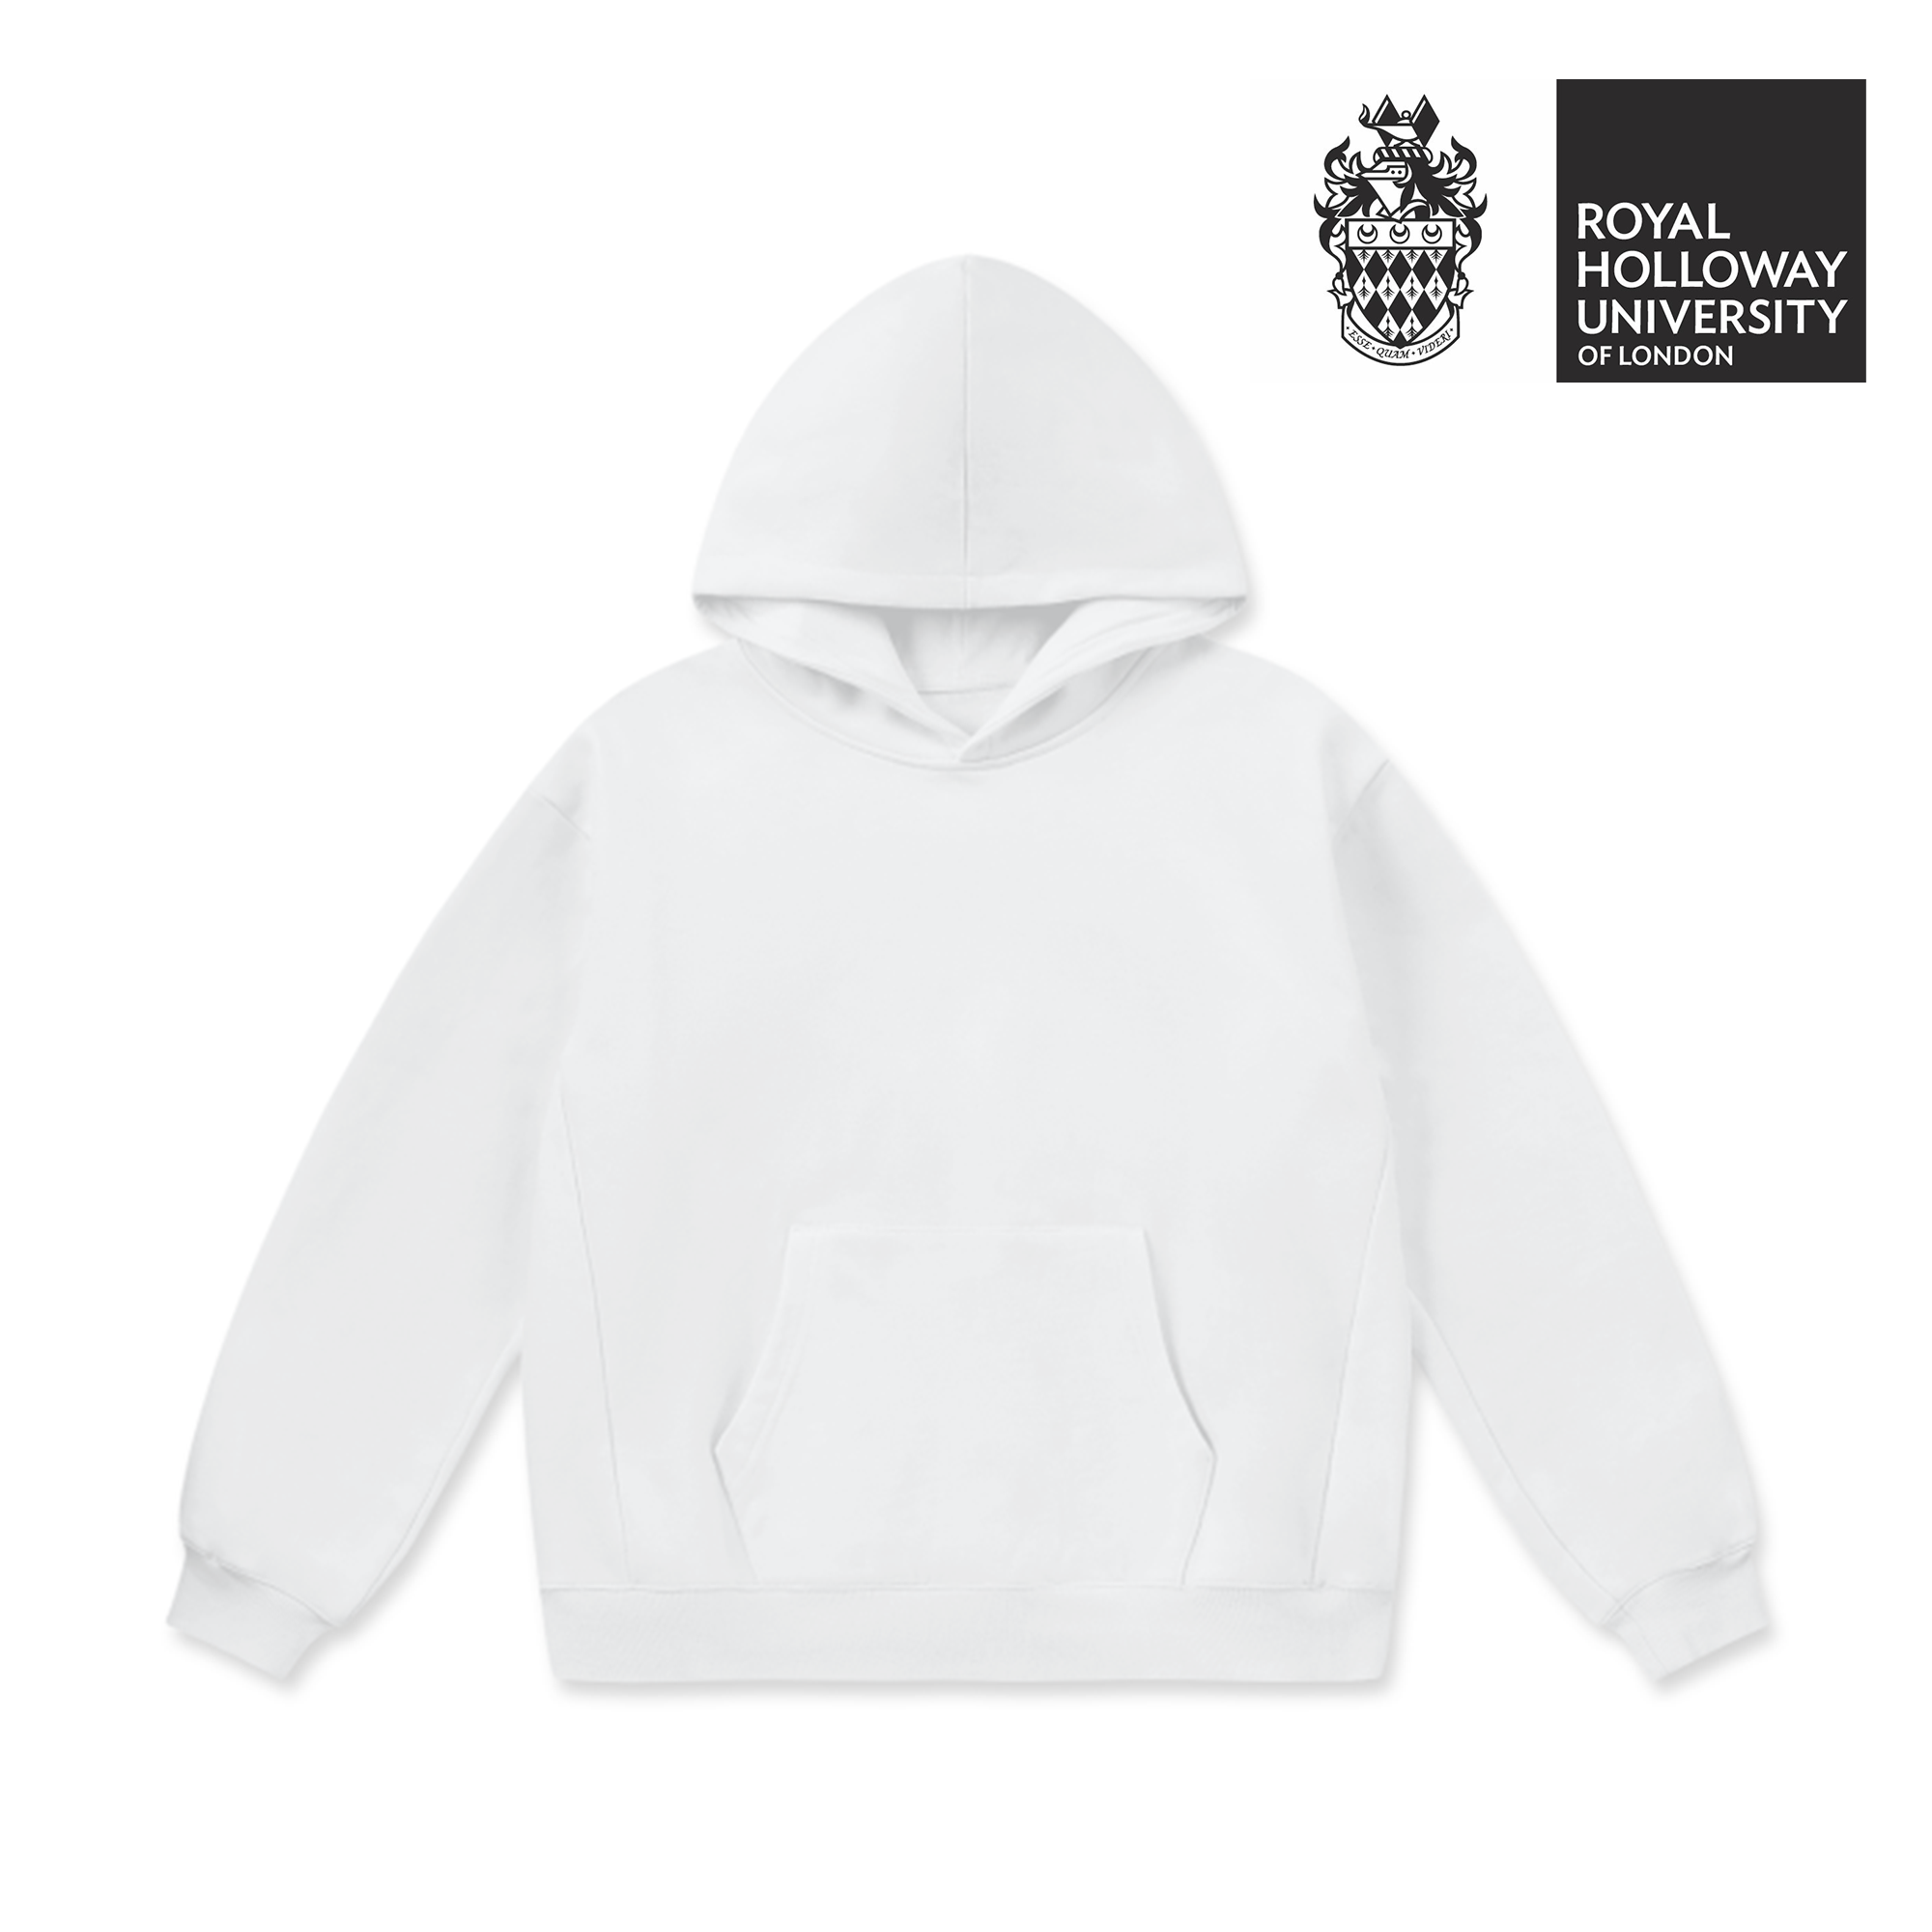 LCC Super Weighted Hoodie - Royal Holloway University of London (Full)